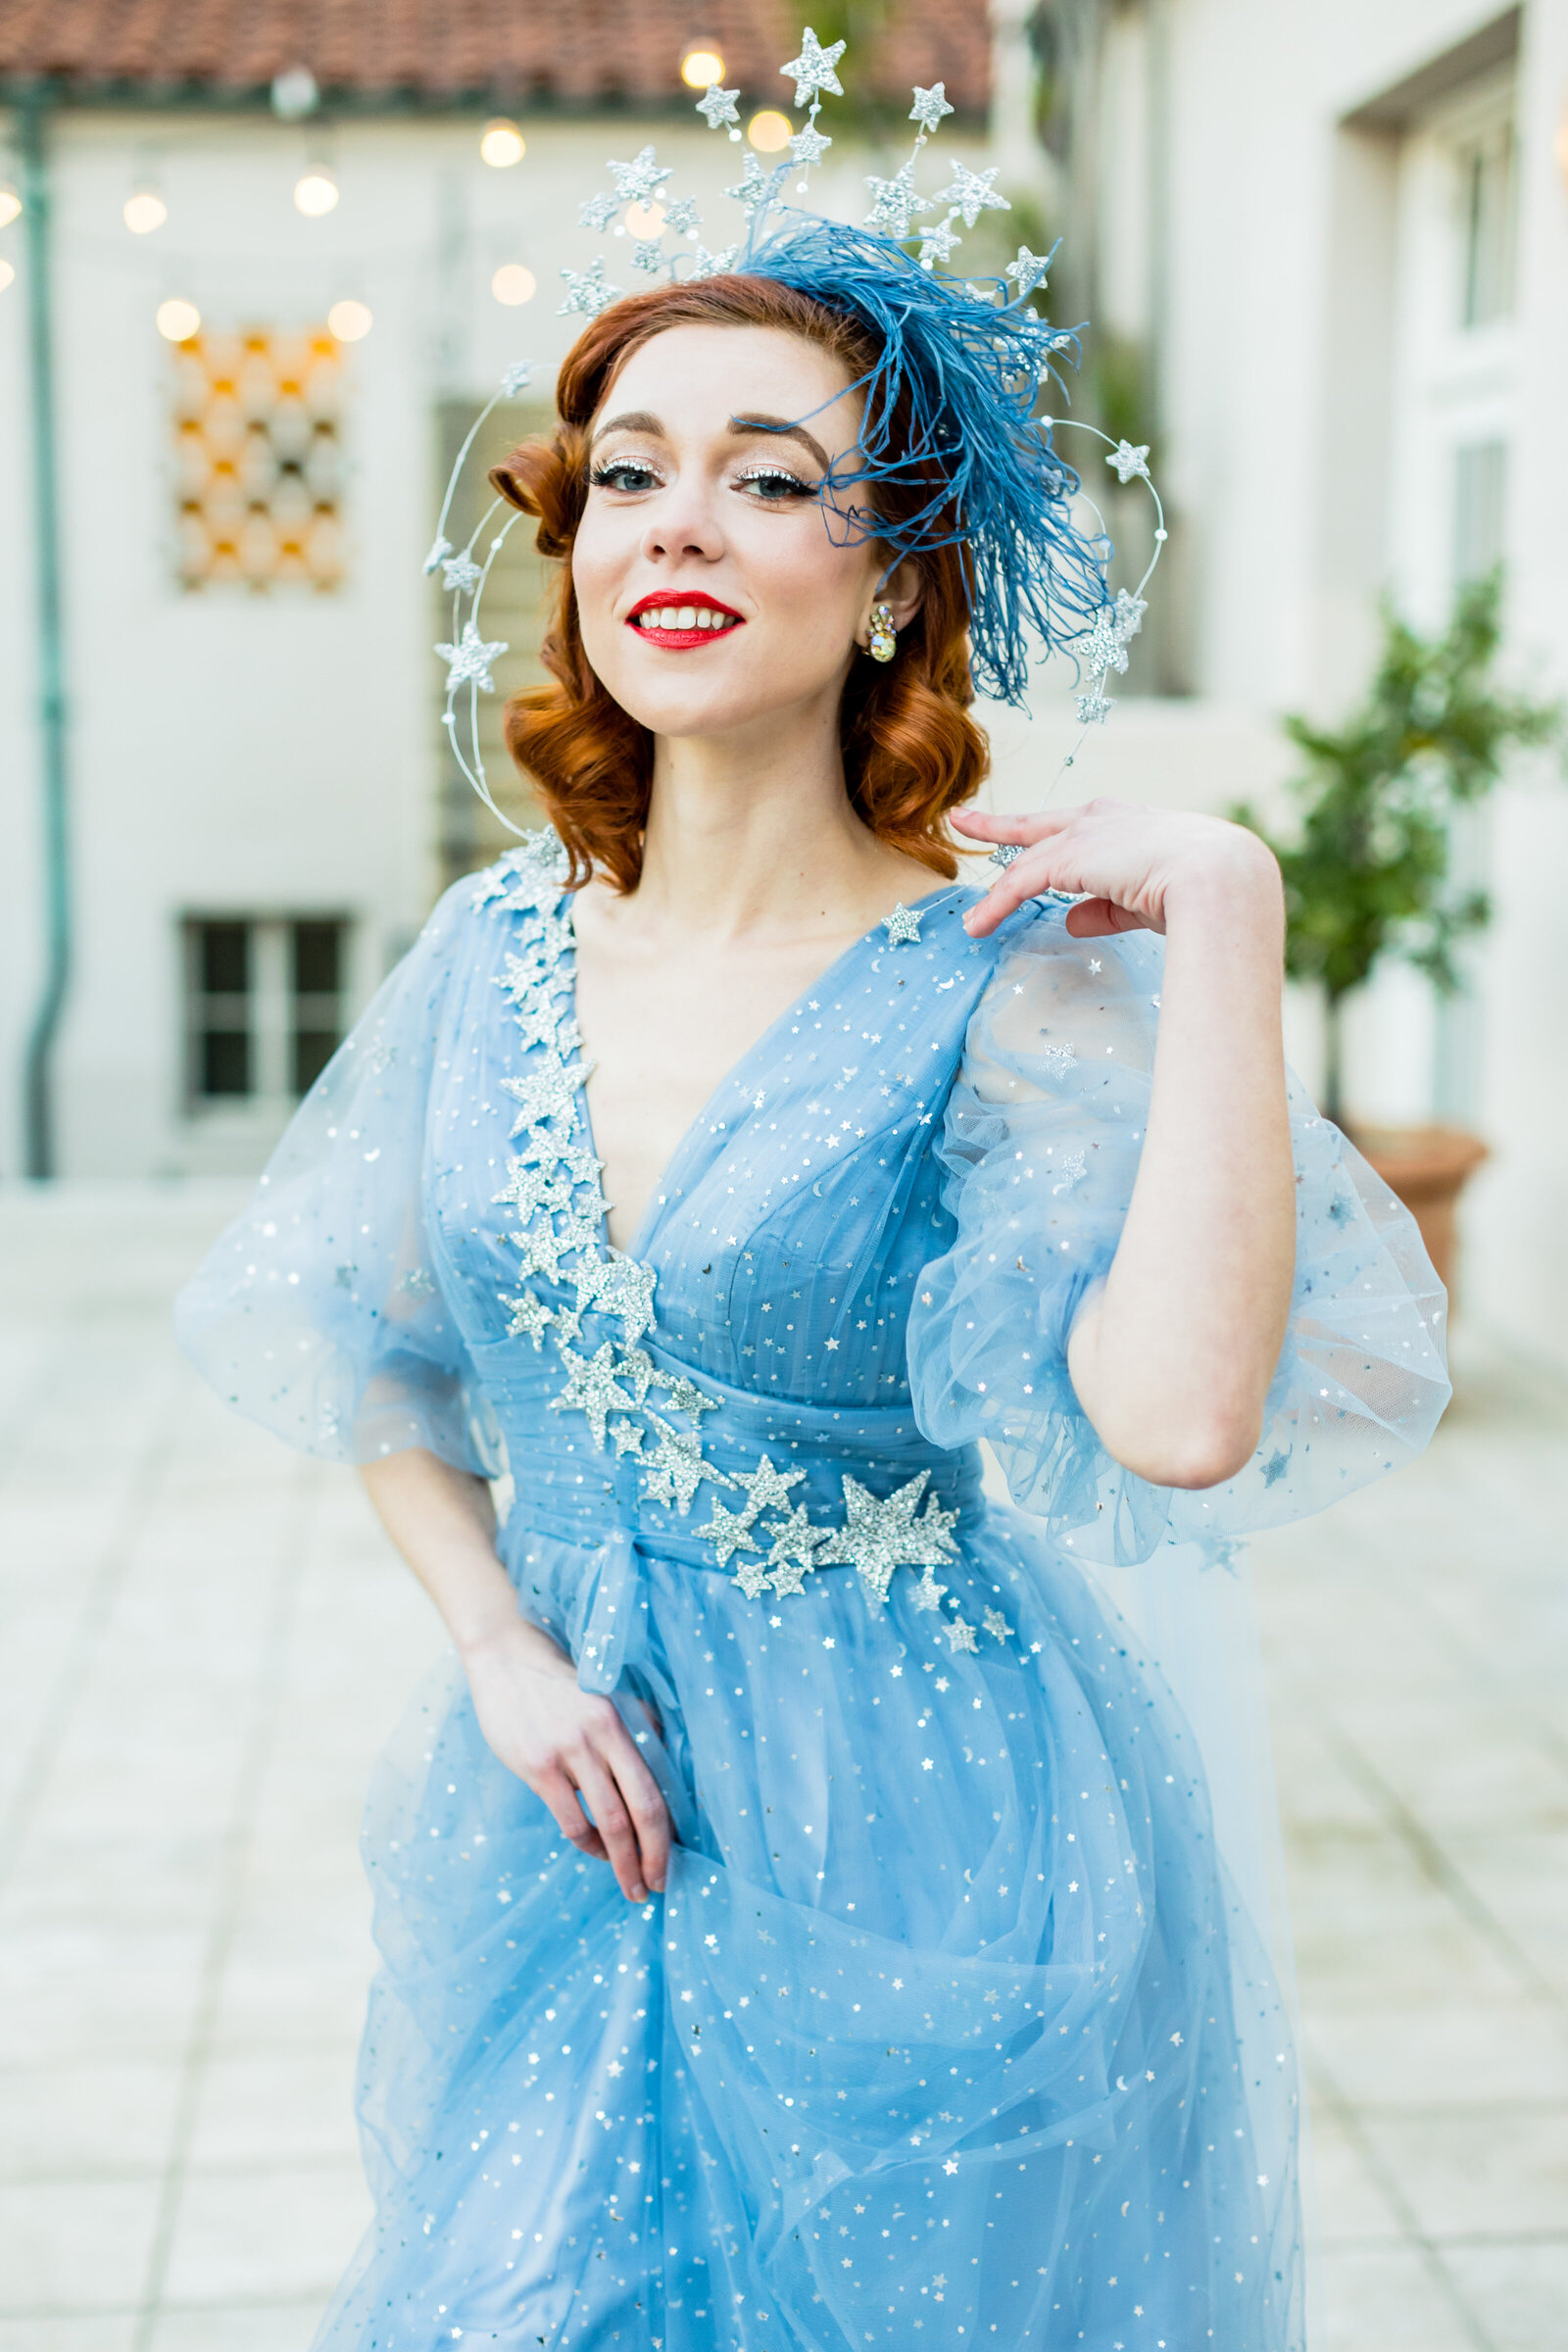 bycphotography-Ebell_LA_Follies_Styled_Shoot-206